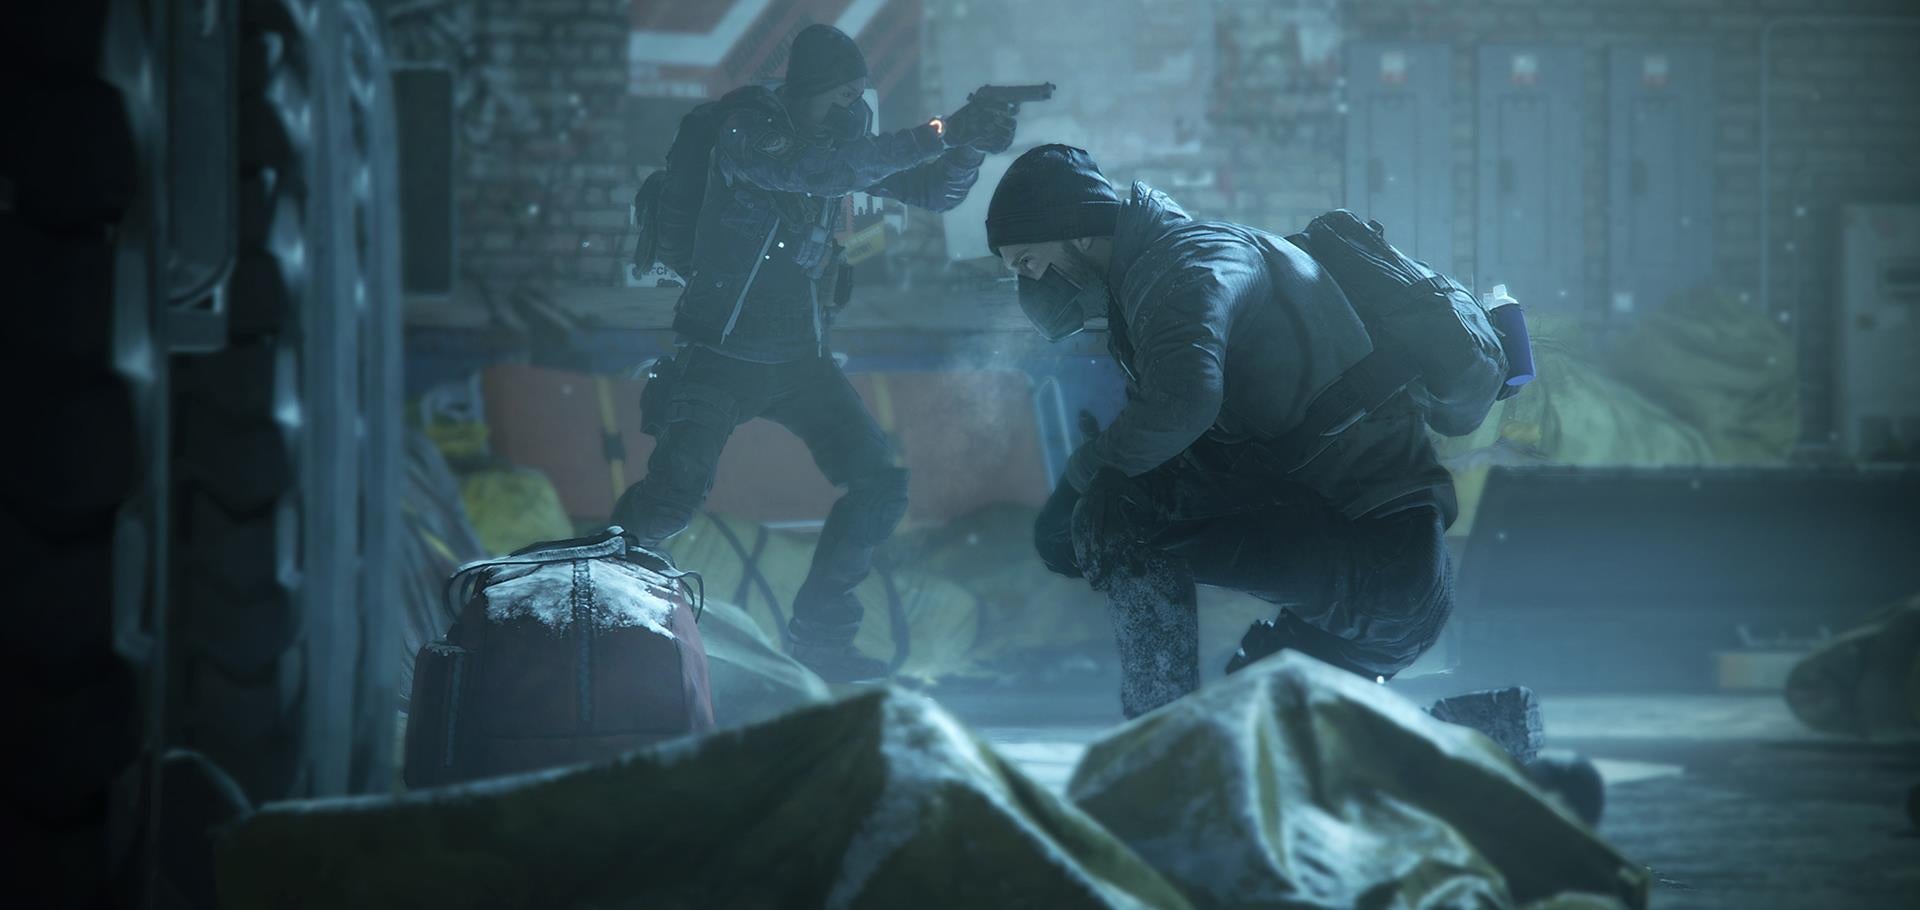 Image for The Division's next patch will focus on PvP balancing, Dark Zone, more